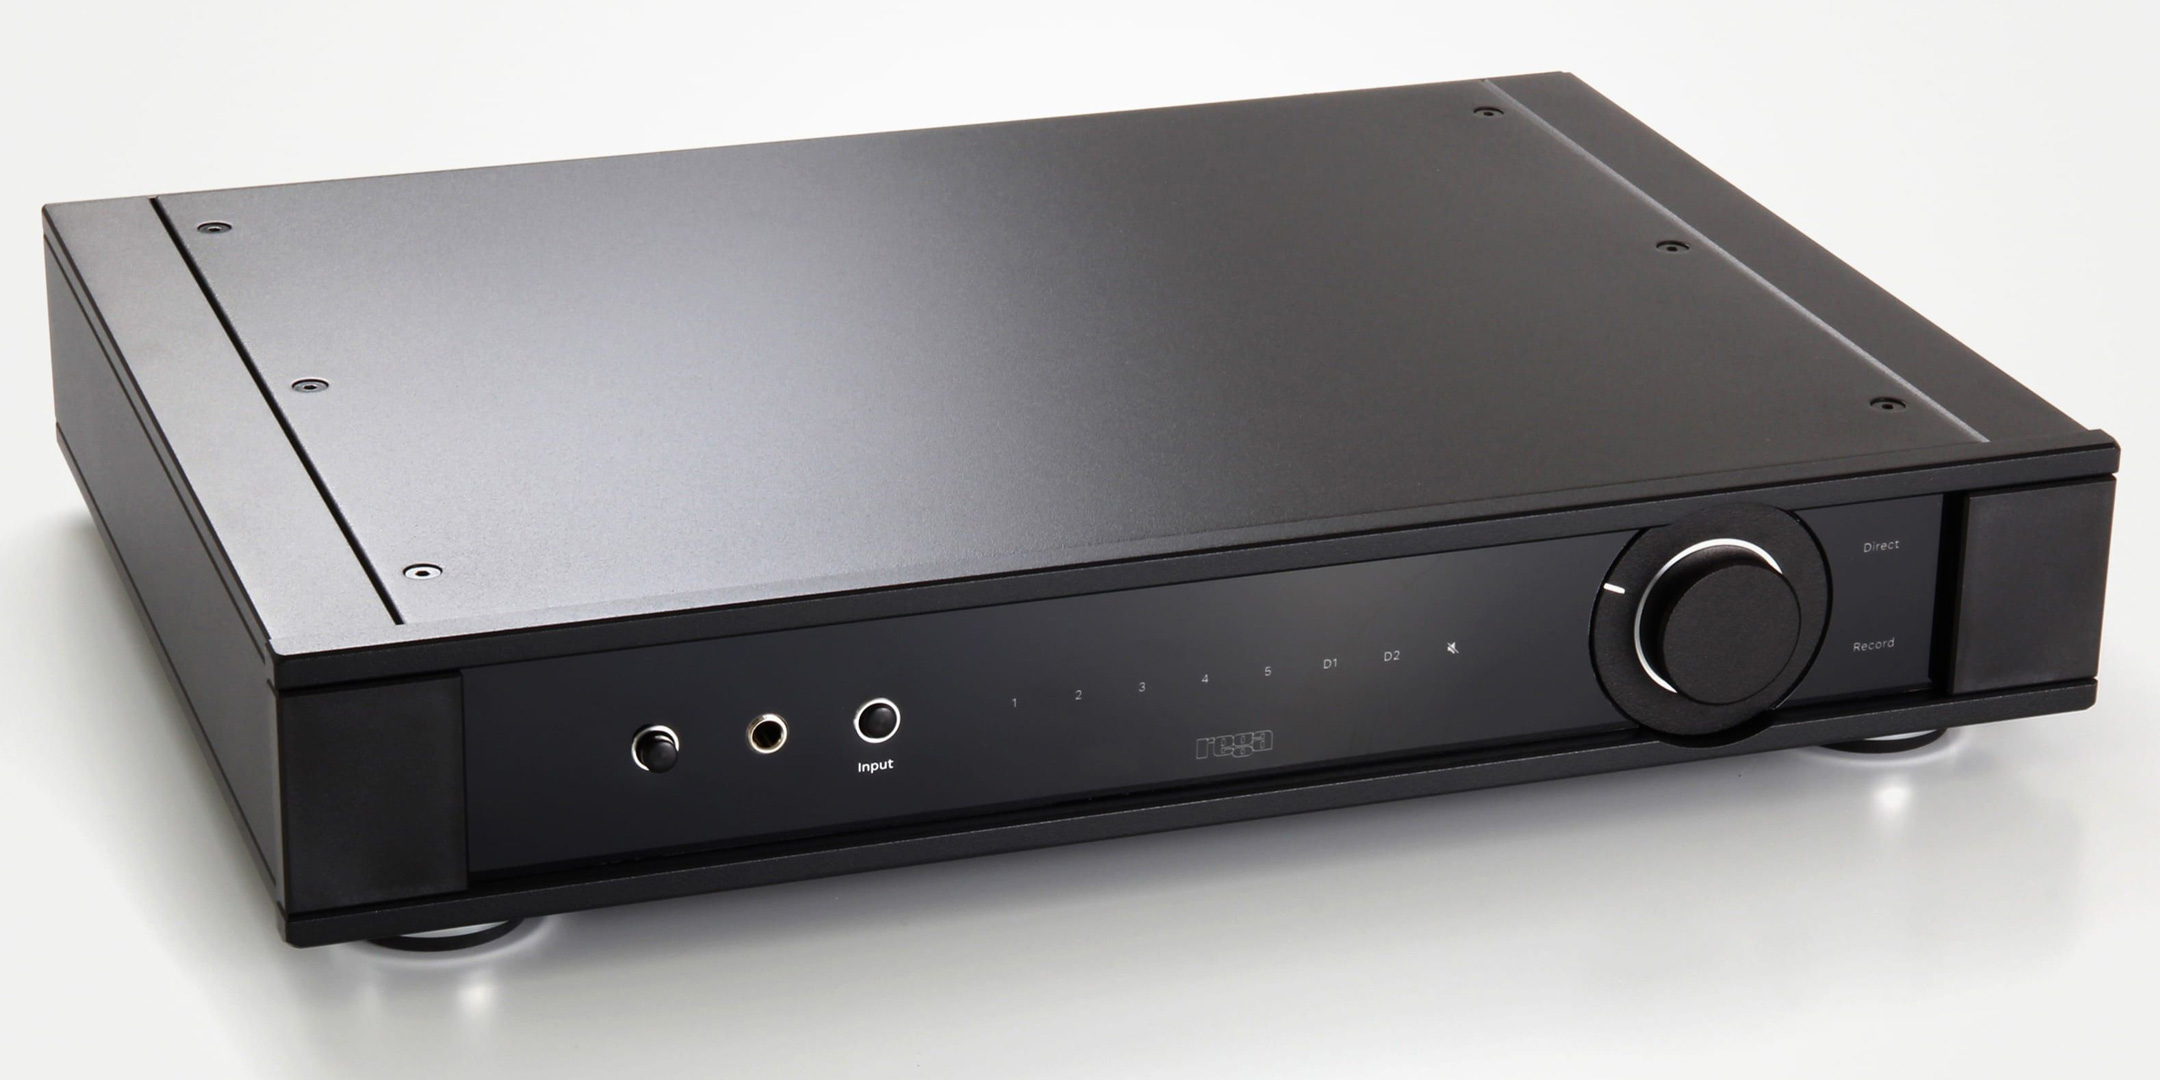 Pic of Rega Elicit mk5 amp from the left